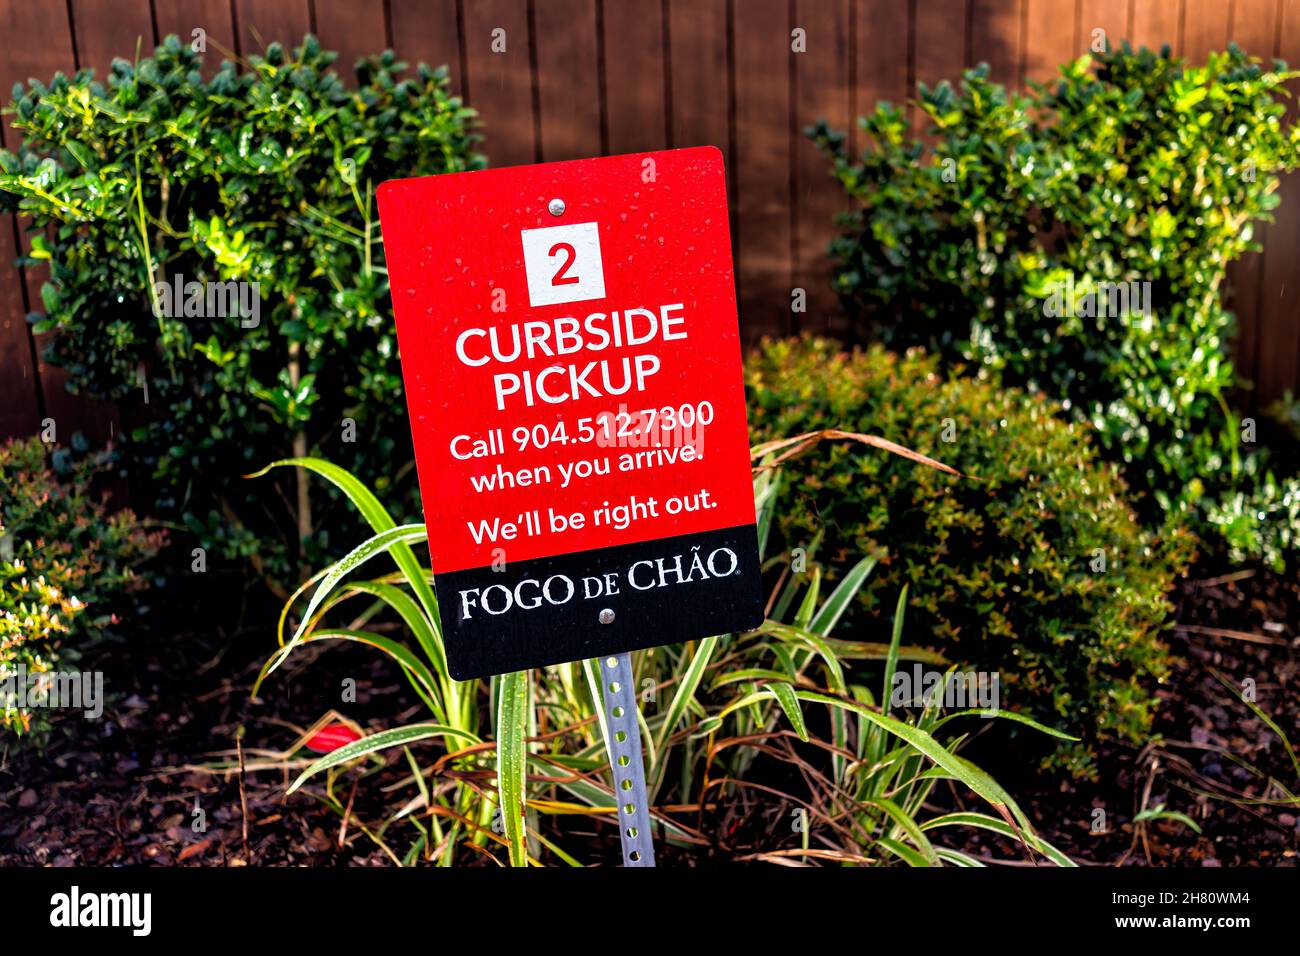 We have contactless curbside - Nordstrom Fashion Valley